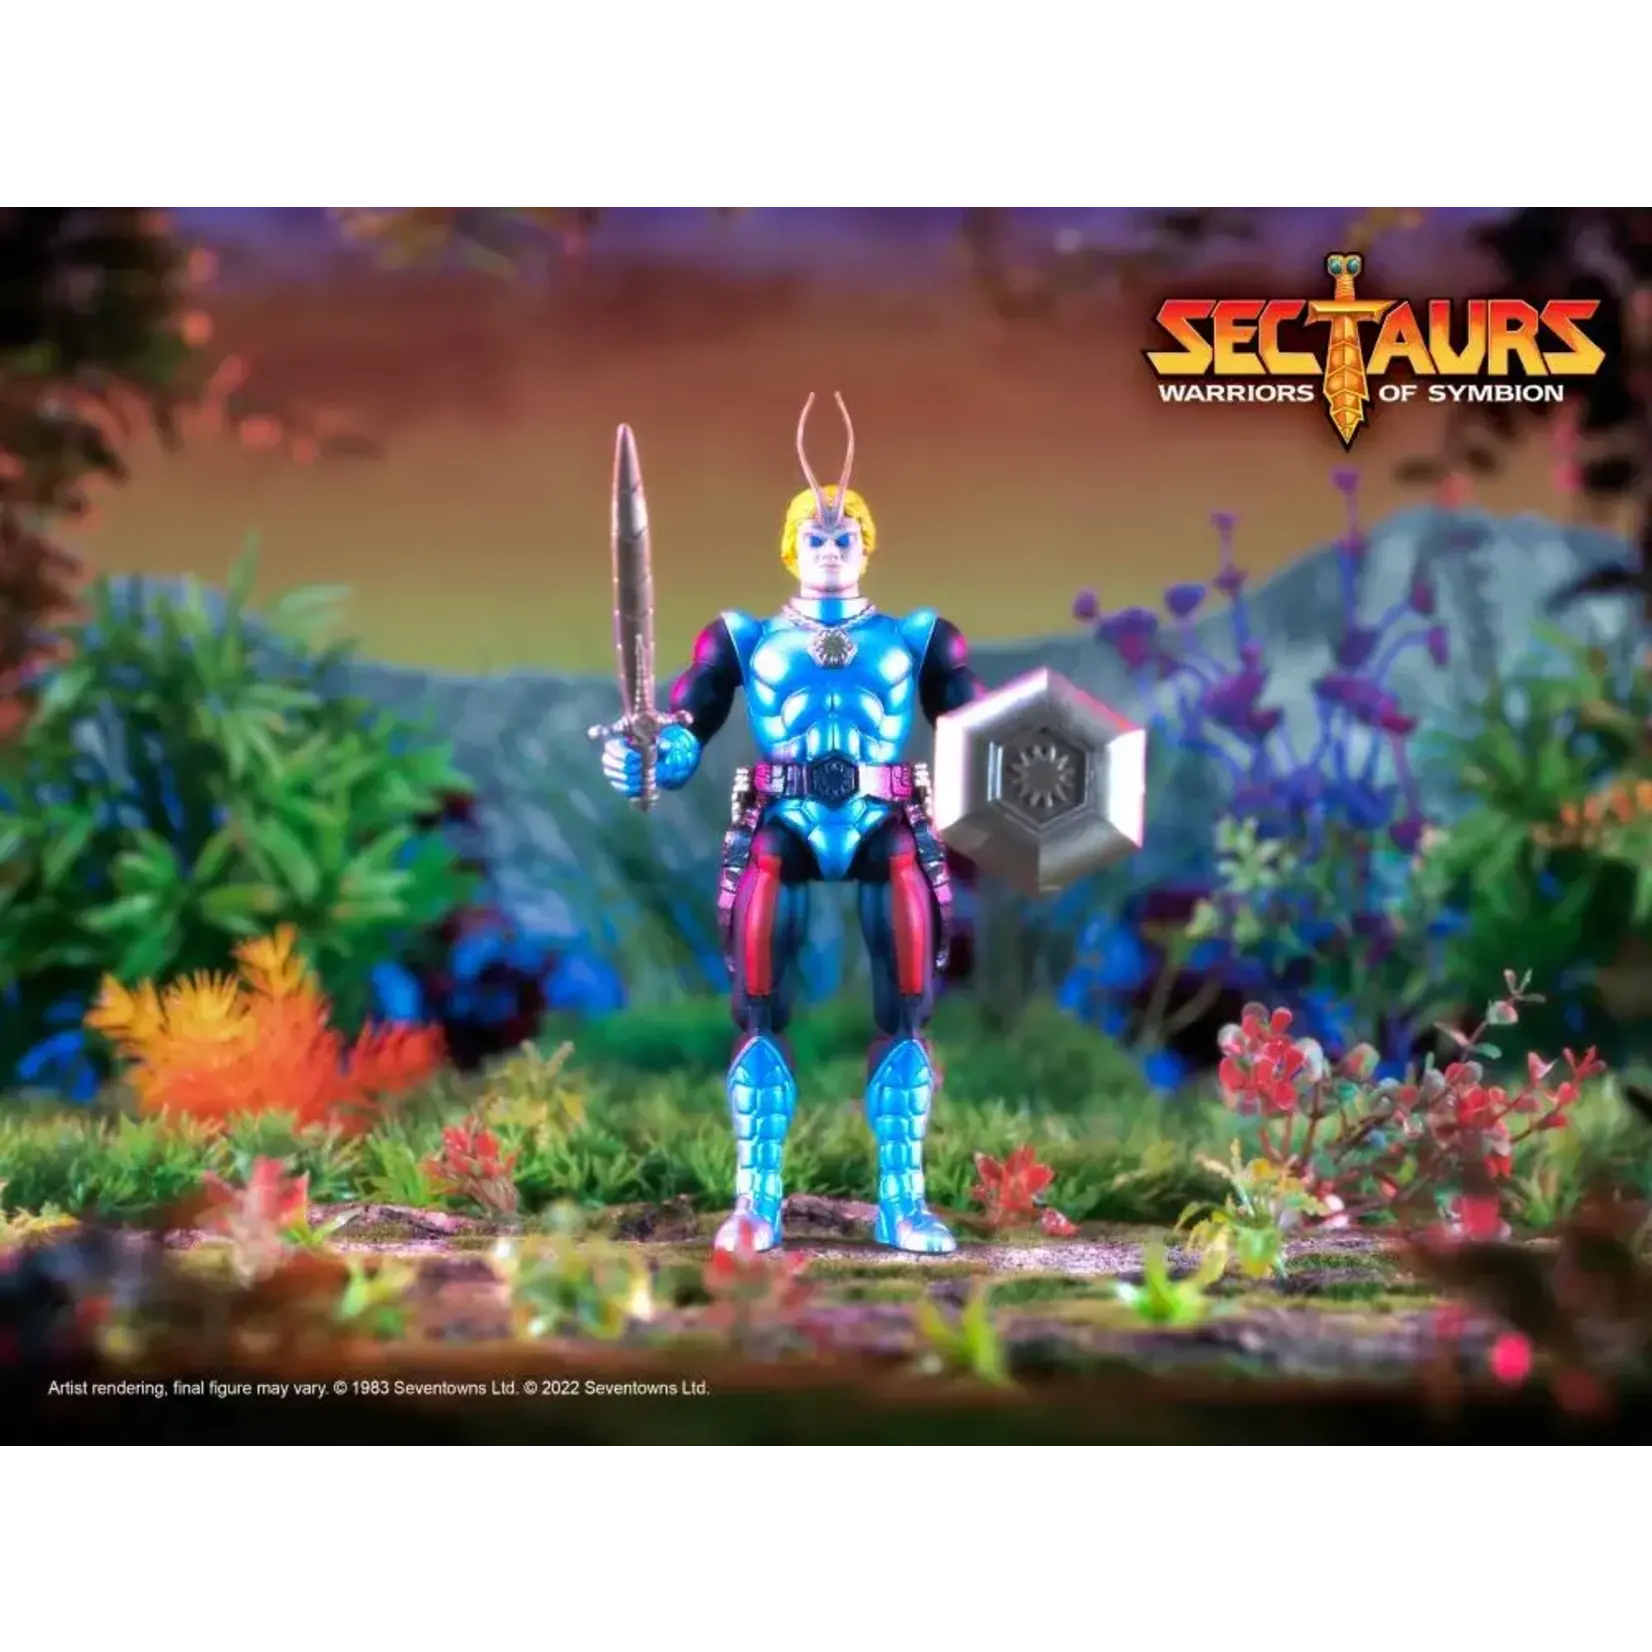 Sectaurs: Warriors of Symbion Sectaurs: Warriors of Symbion Dargon Action Figure